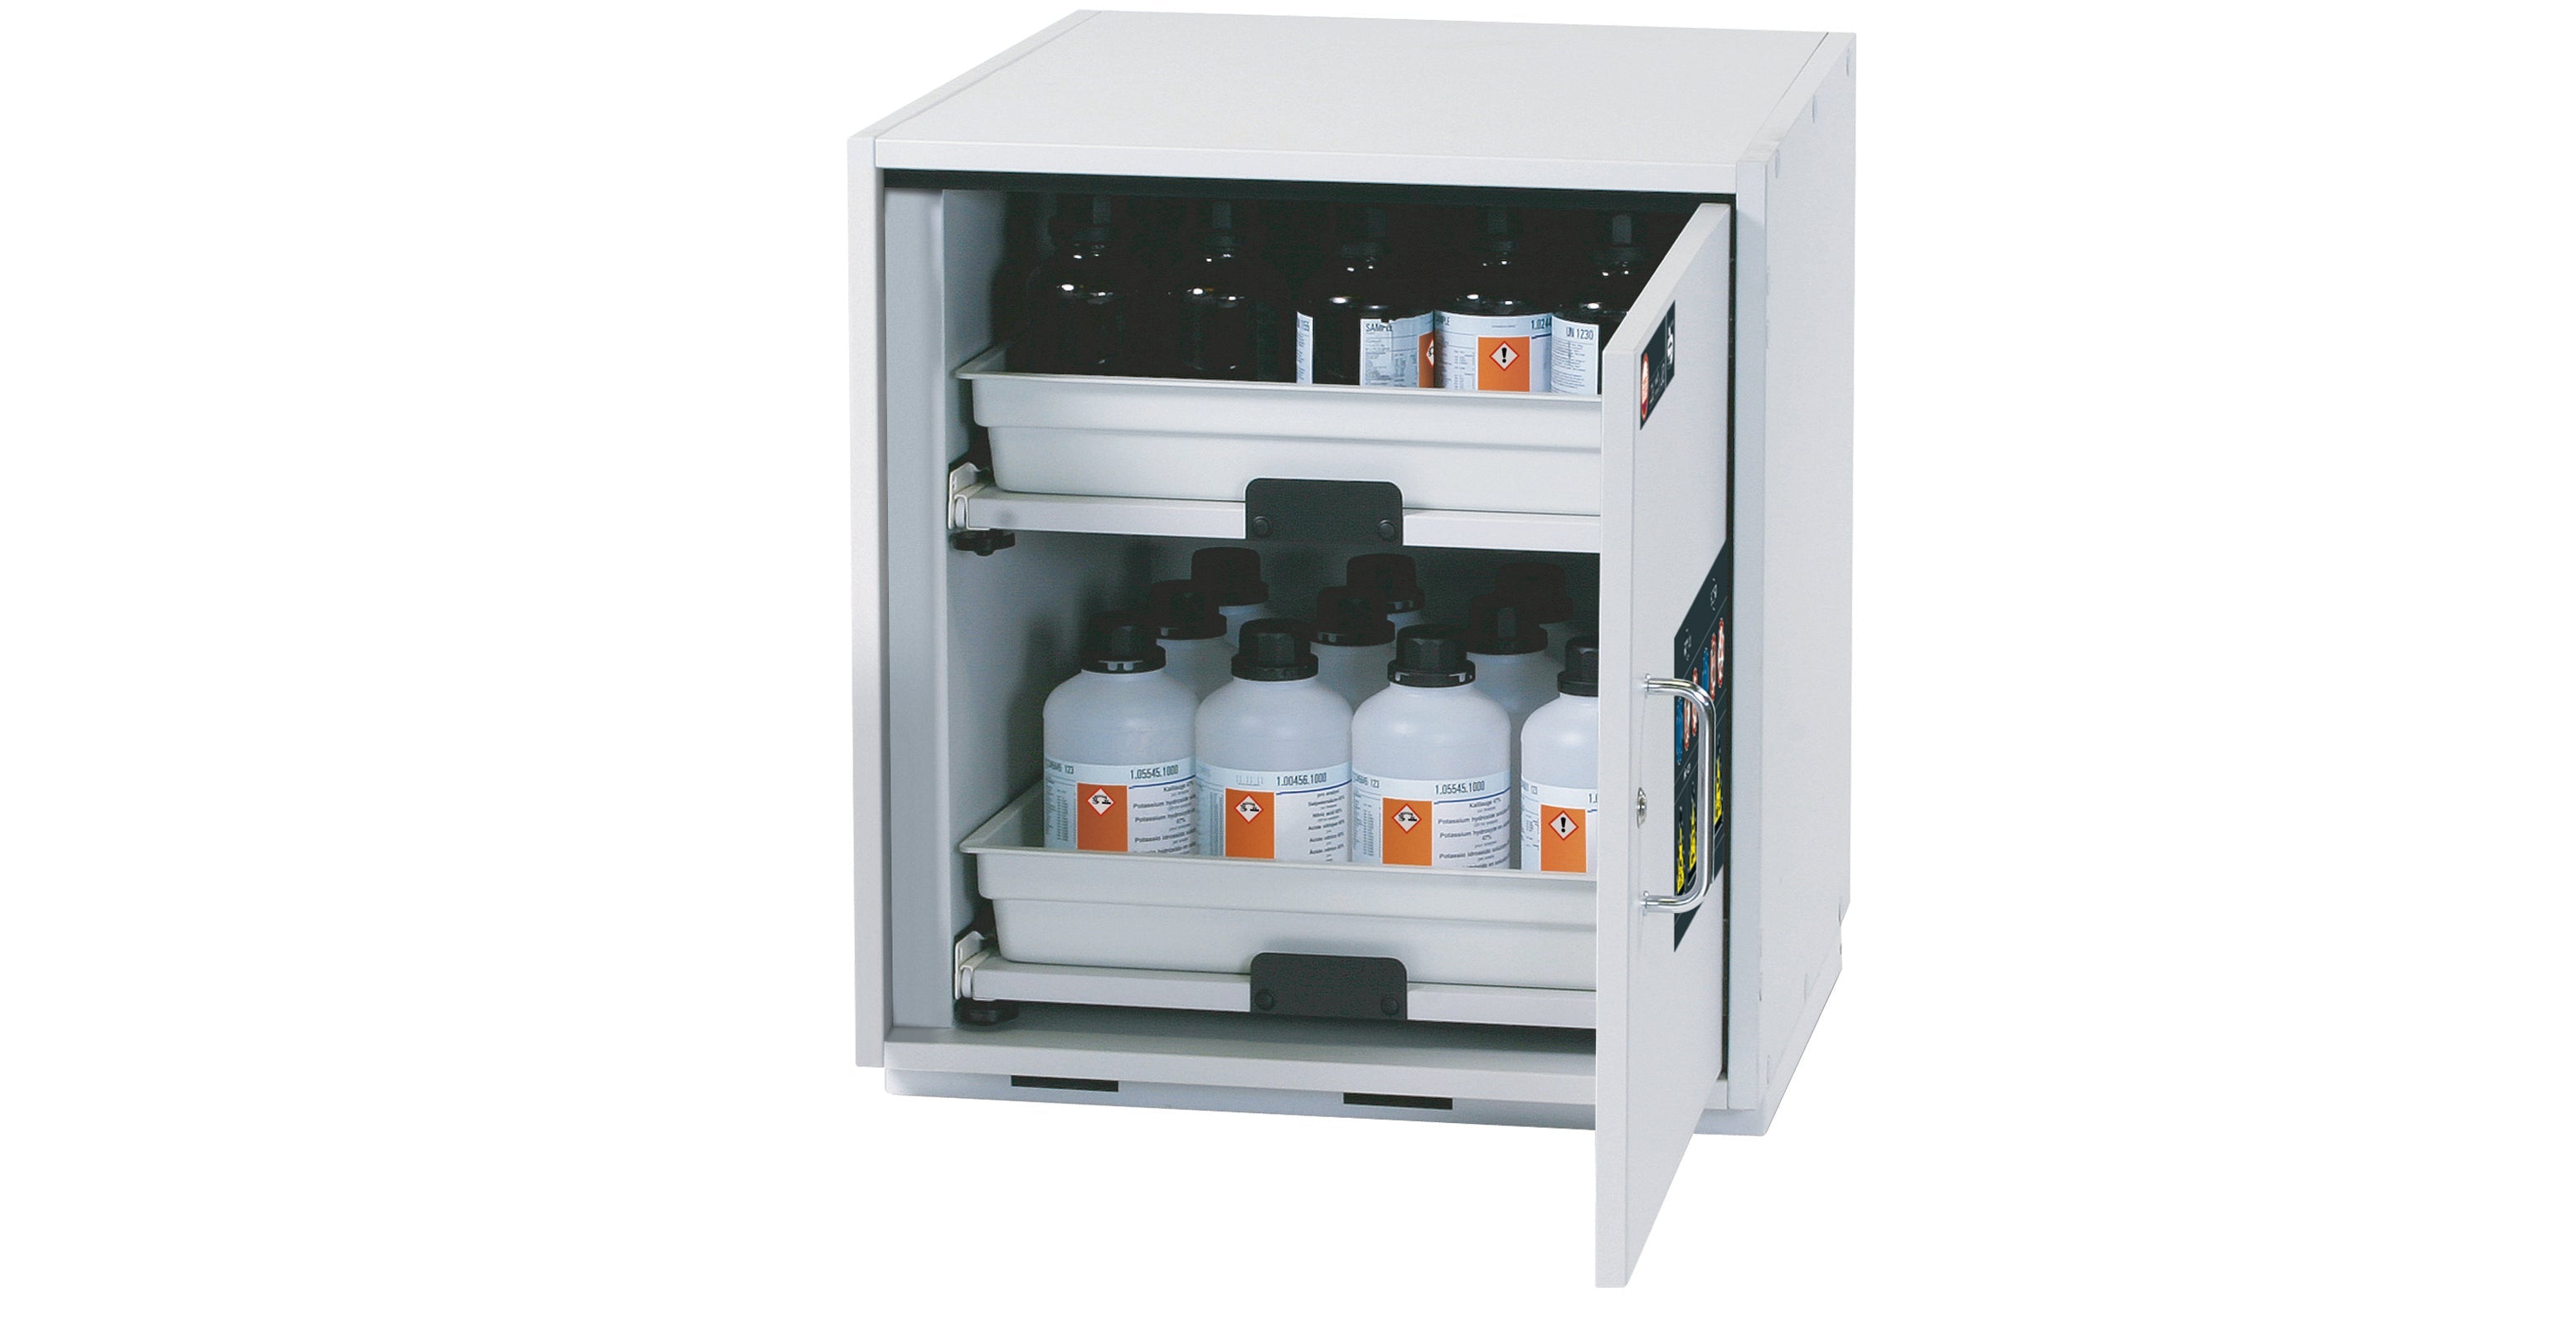 Acid and alkali base cabinet SL-CLASSIC-UB model SL.060.059.UB.TR in light gray with 2x AbZ shelf pull-out (FP plate/polypropylene)